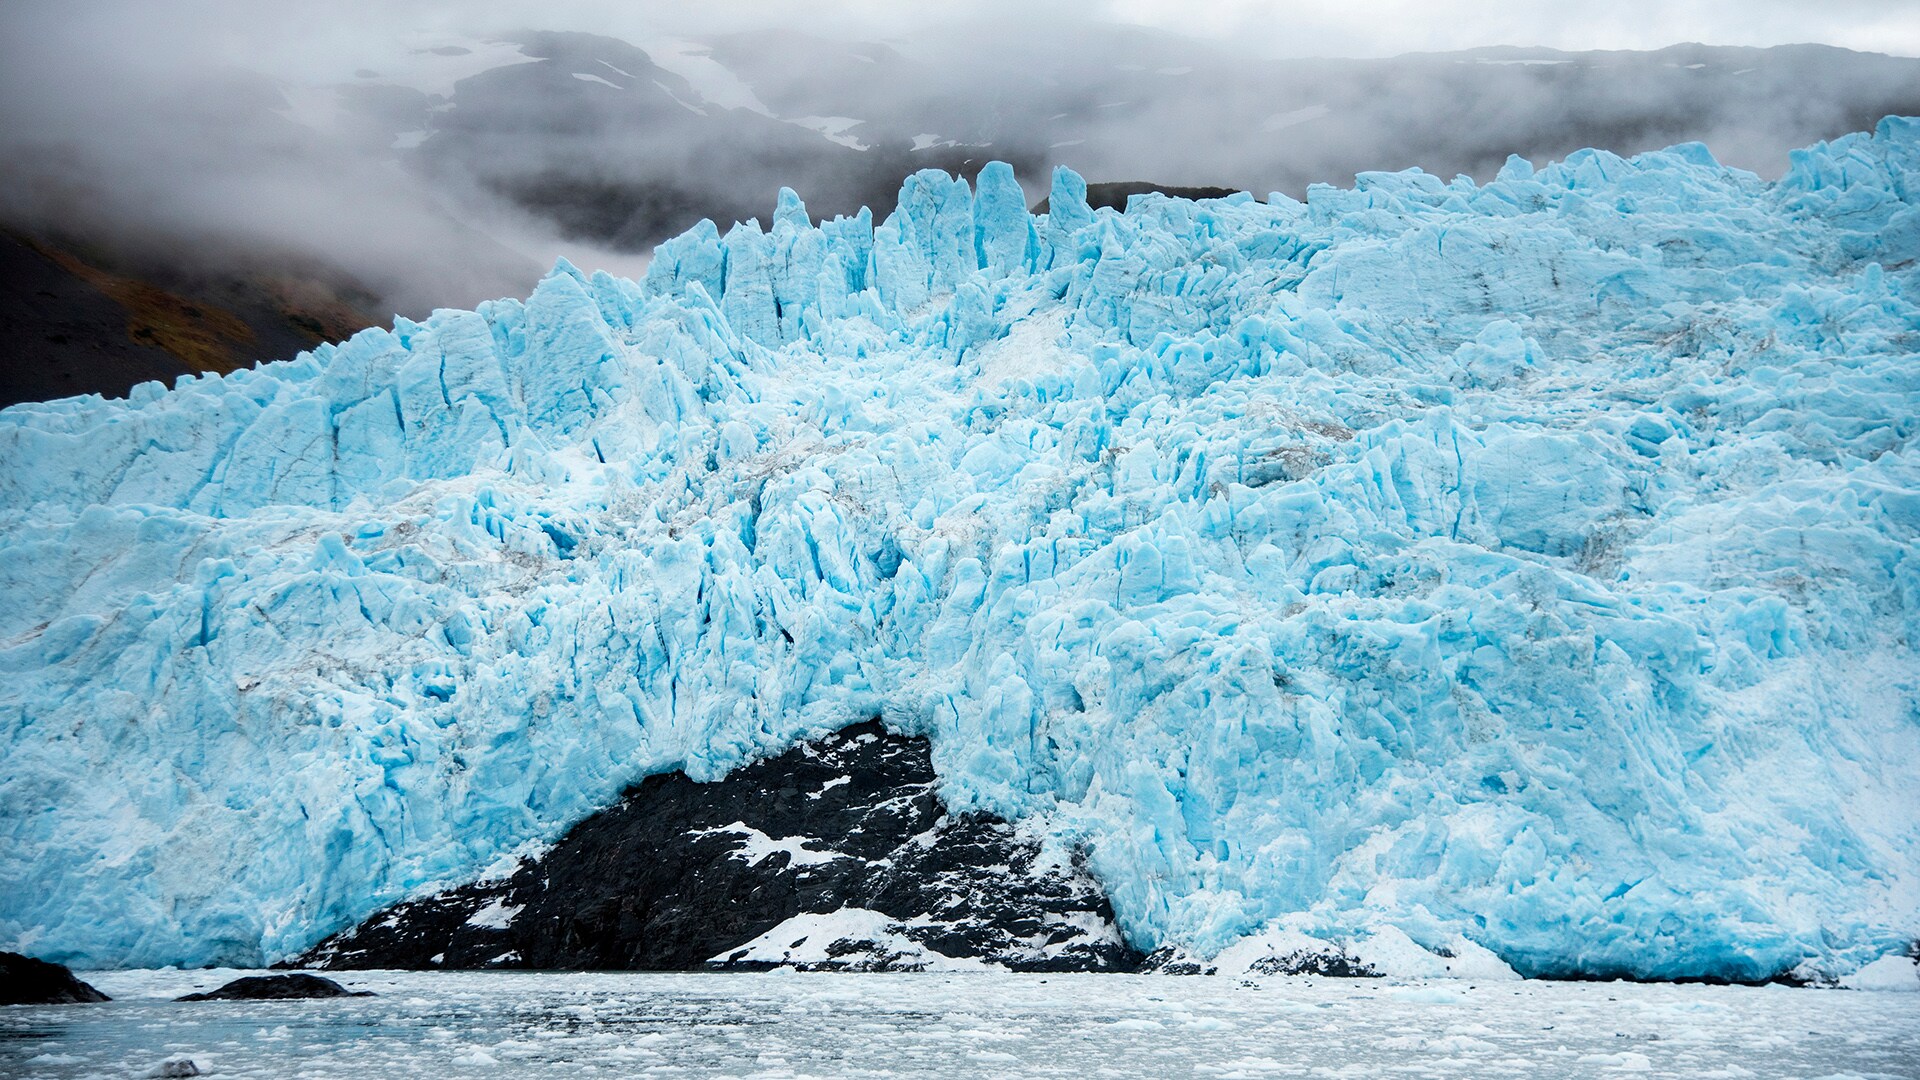 Aialik Glacier is the largest glacier in Aialik Bay, located in Kenai Fjords National Park. 